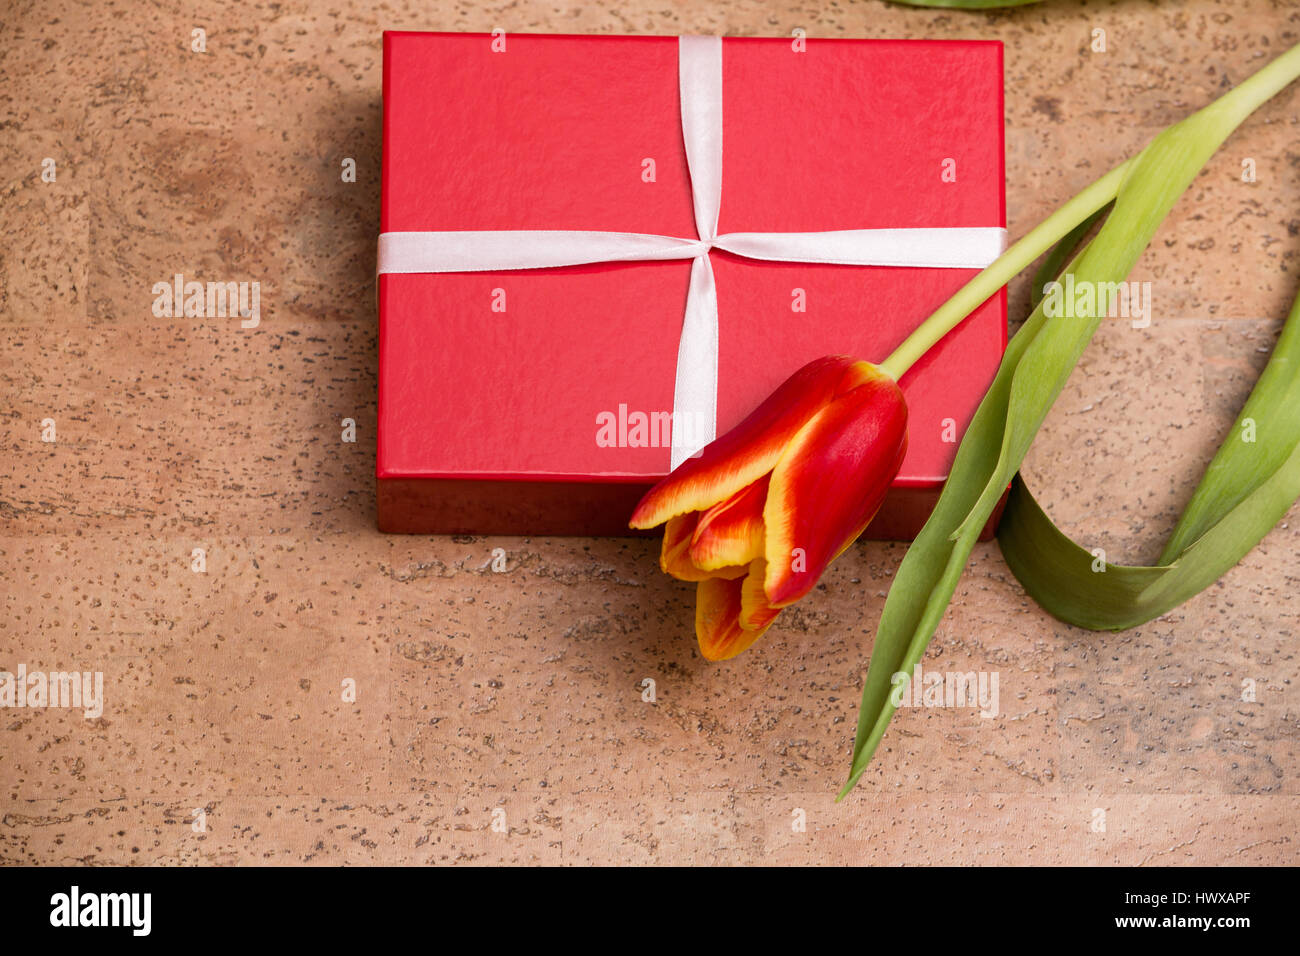 The tulips and gift box on a cork floor Stock Photo